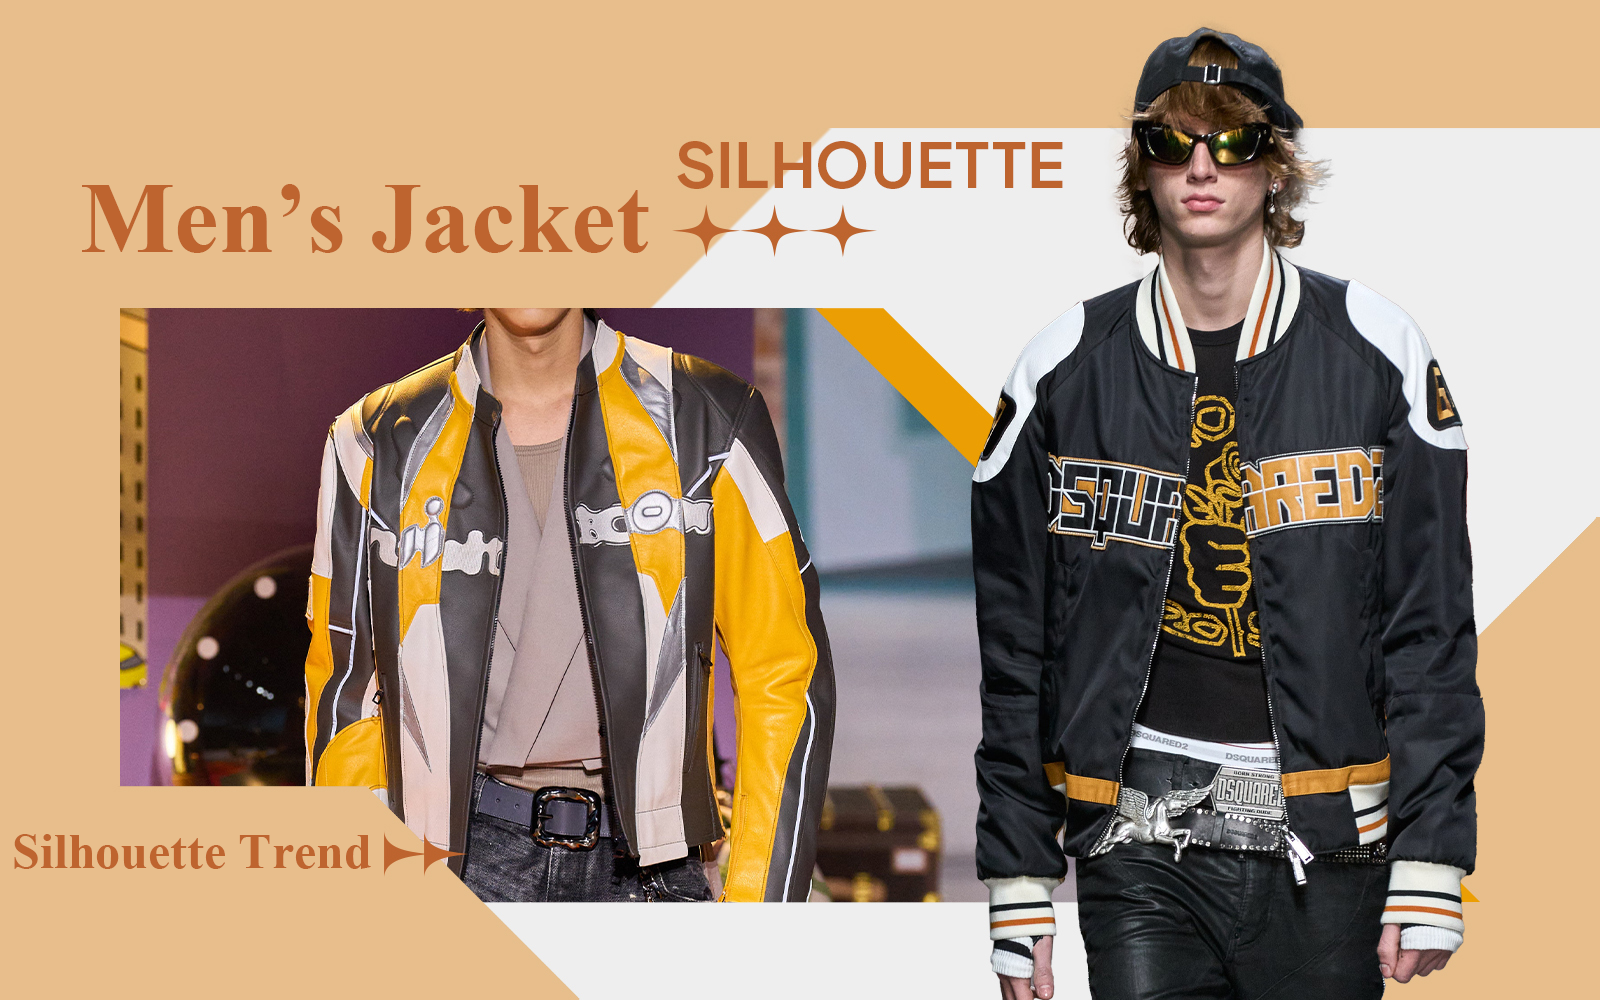 Urban Exploration -- The Silhouette Trend for Men's Jacket